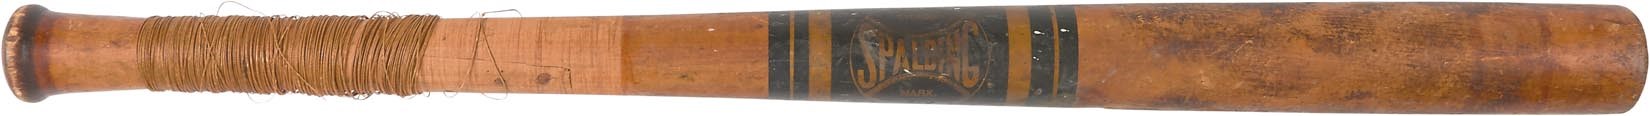 Early Baseball - 1880s Spalding #4 Bat with Unusual Stringed Handle (Samuel M. Chase Collection)